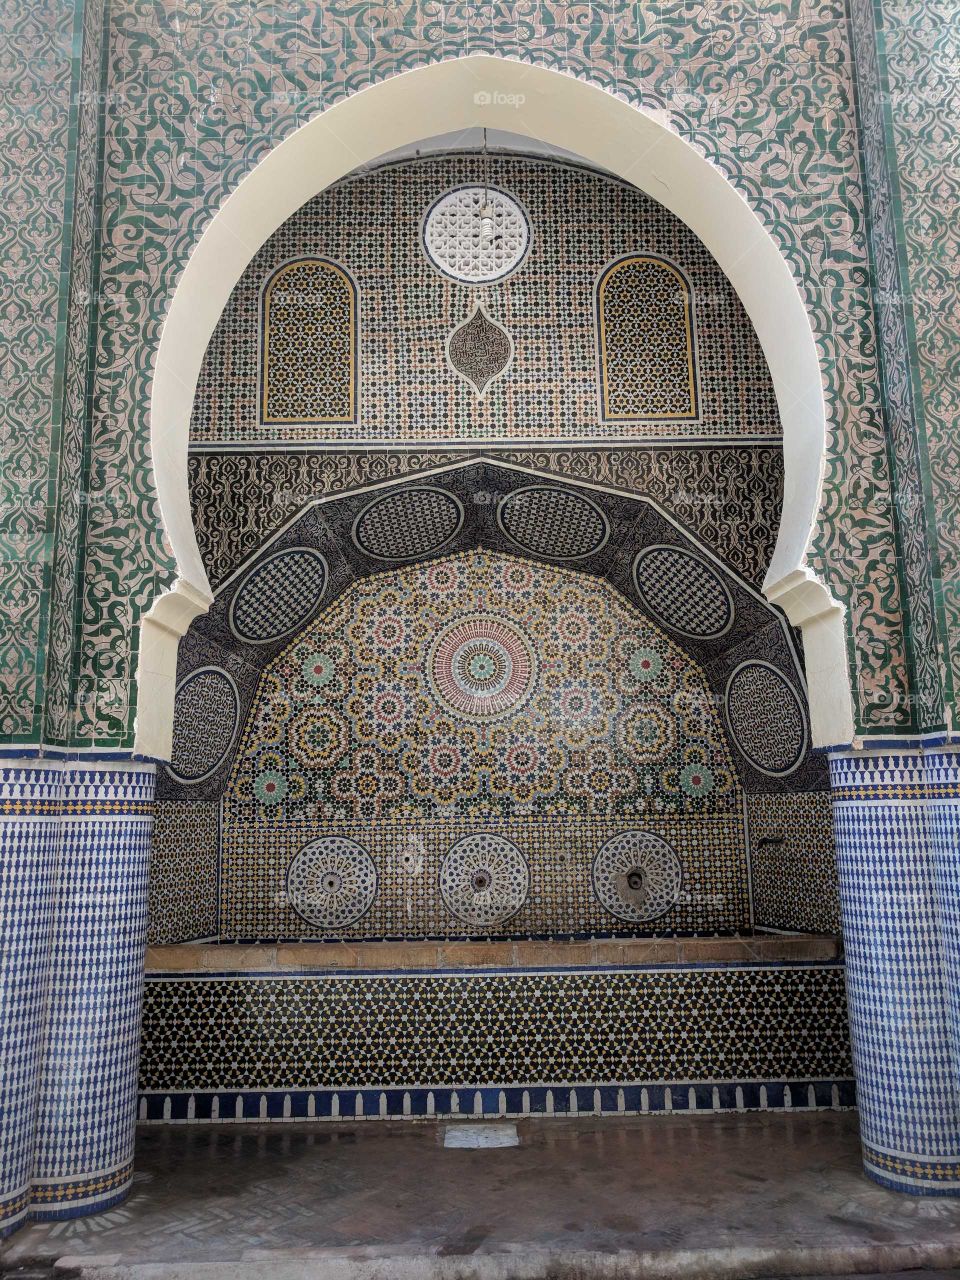 Beautiful Blue, Green, Orange, Yellow, and Off White Ceramic Mosaic Double Arch (Entrance/Entry Way) in the Old Medina in the City of Fez (Fes) in Morocco